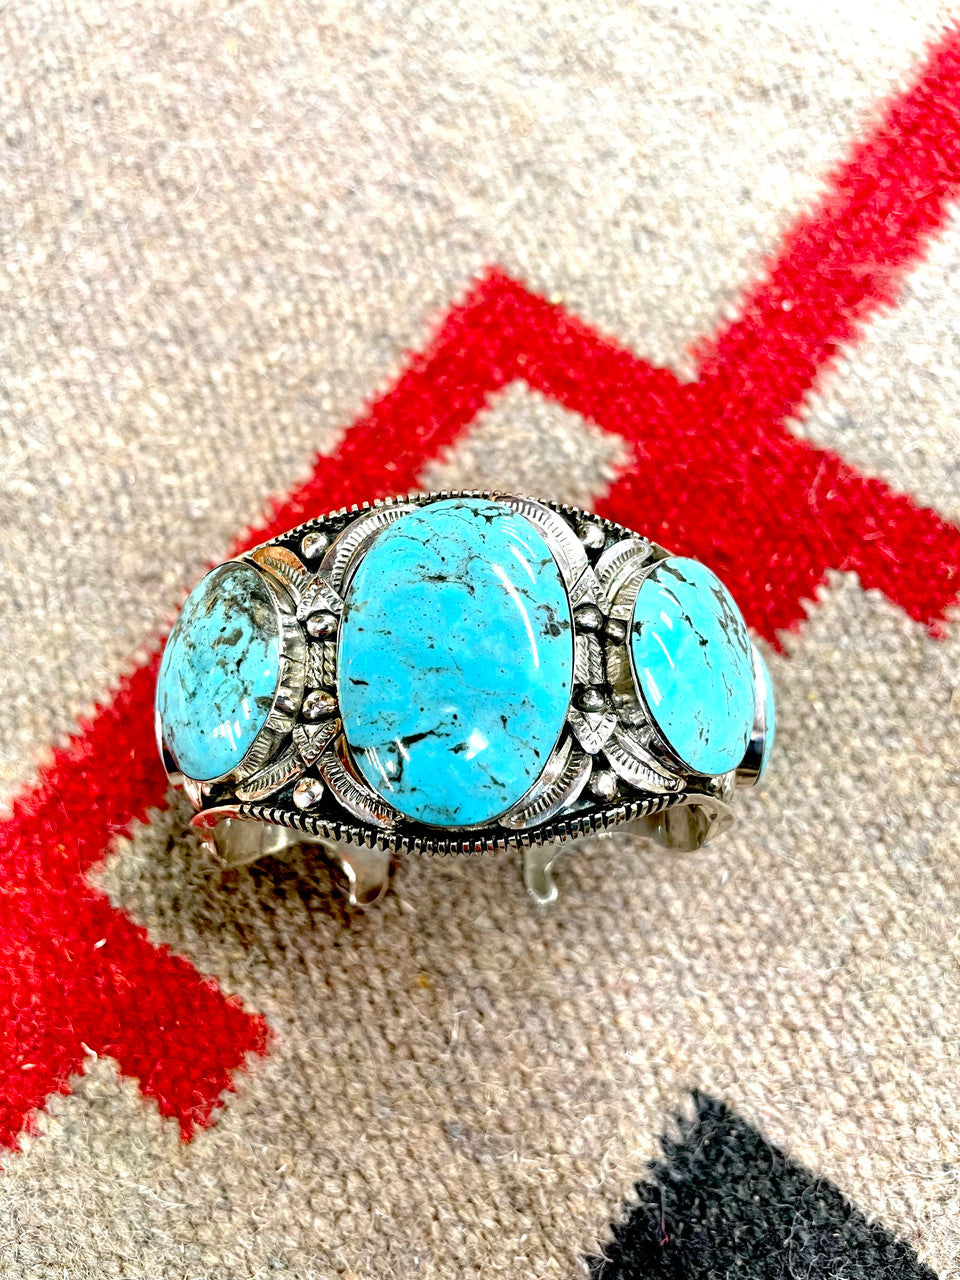 5 Stone Turquoise Cuff by Eddy Chaco 